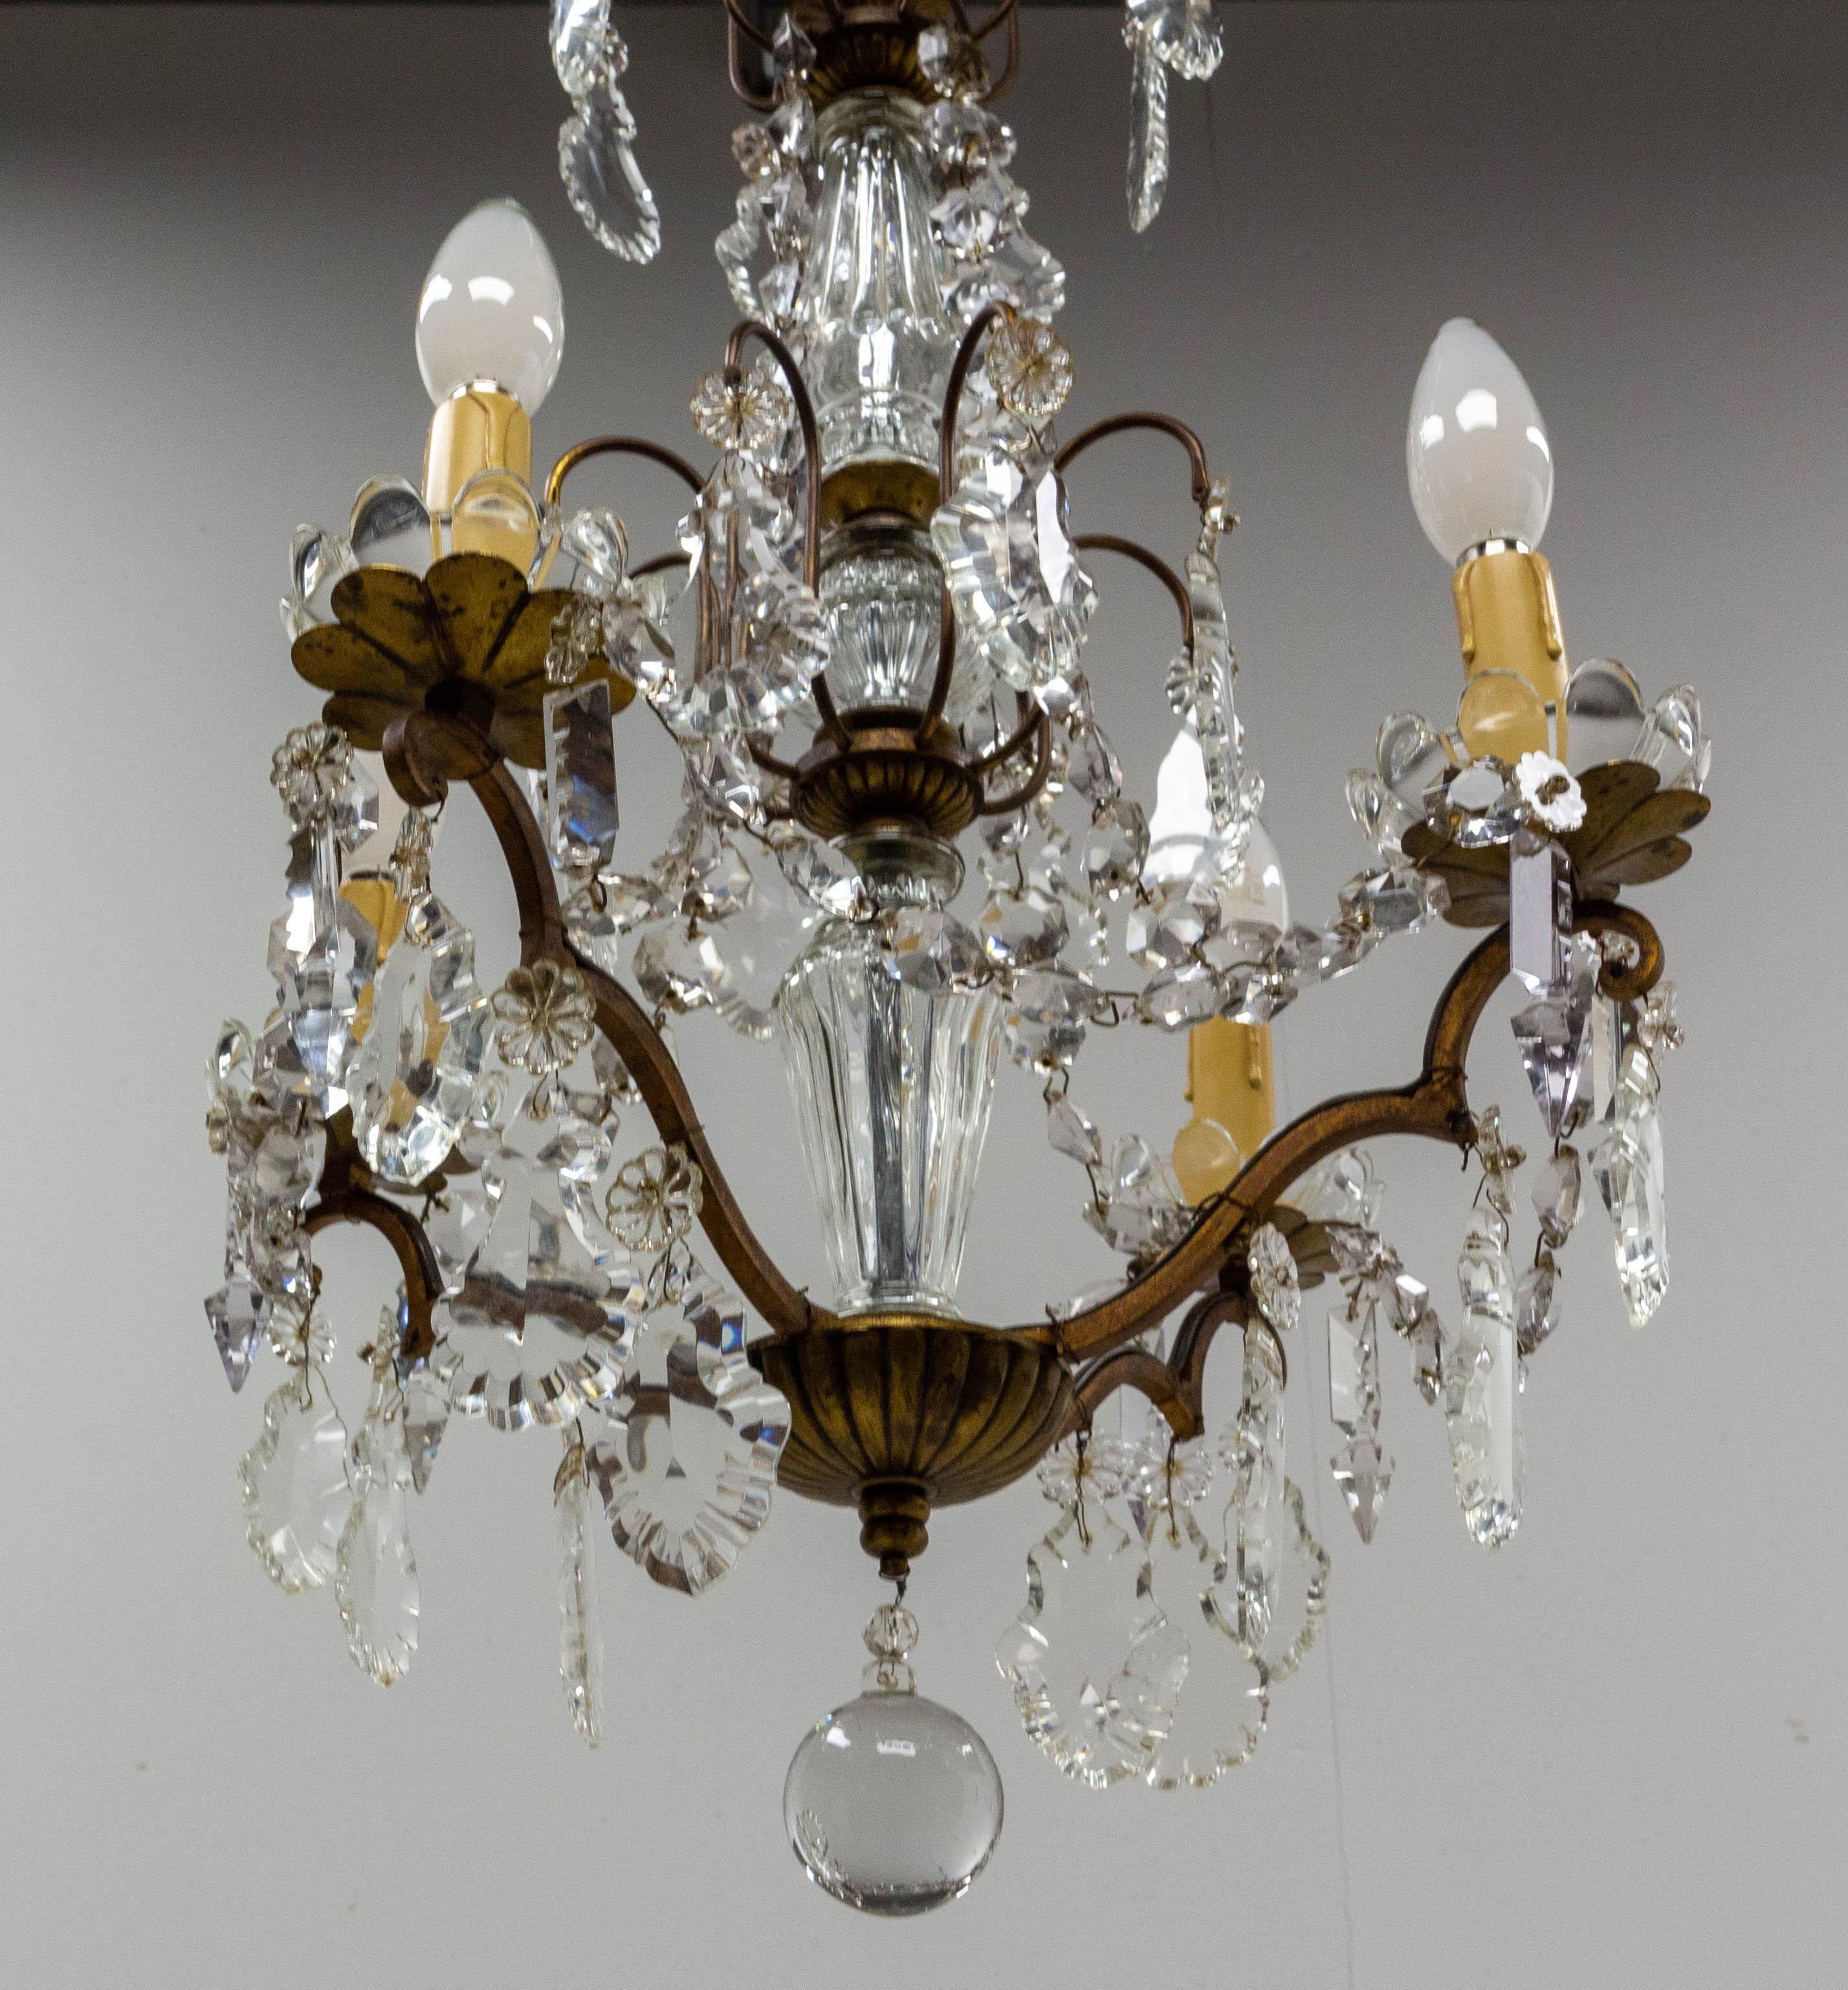 Mid-20th Century Chandelier with Crystal Drops and Ball Ceiling Pendant Midcentury, France For Sale